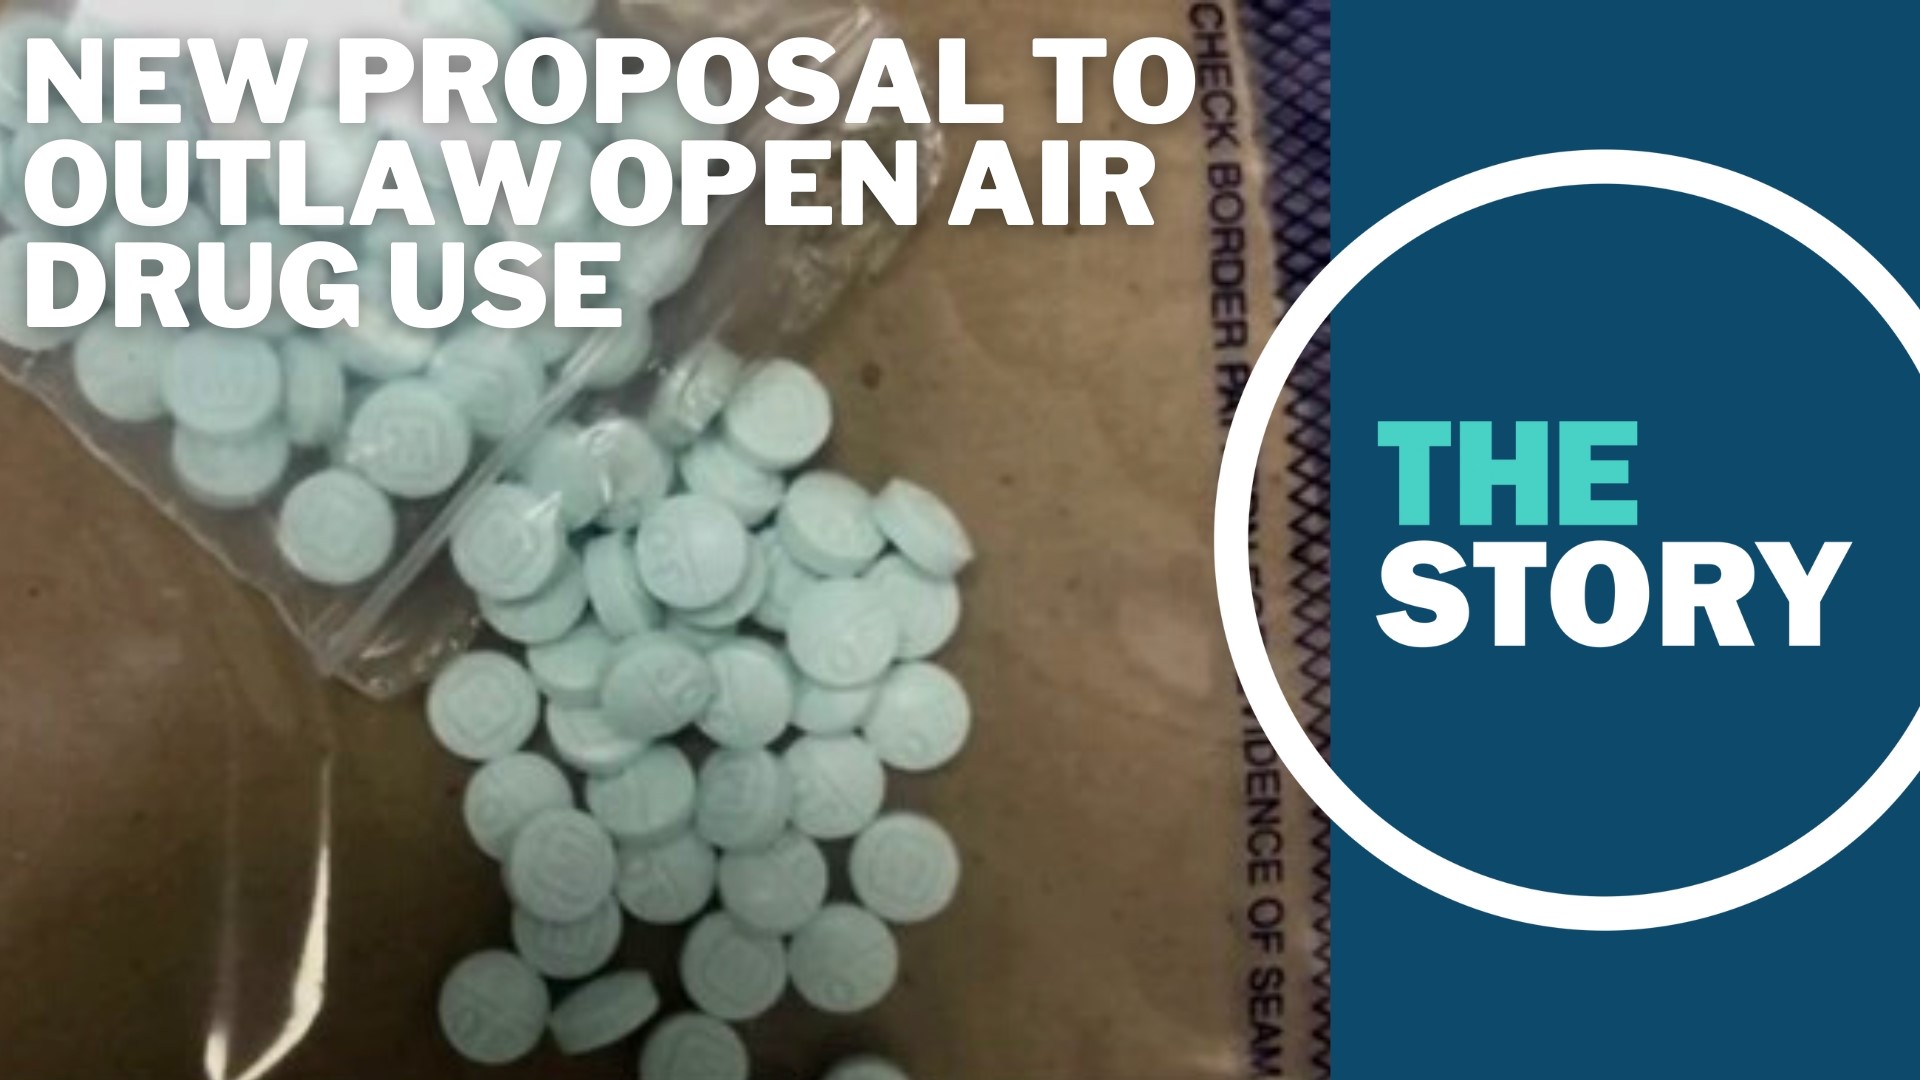 Portland Mayor Ted Wheeler and Commissioner Rene Gonzalez are gearing up to reintroduce an open air drug use ban similar to the one proposed earlier this summer.